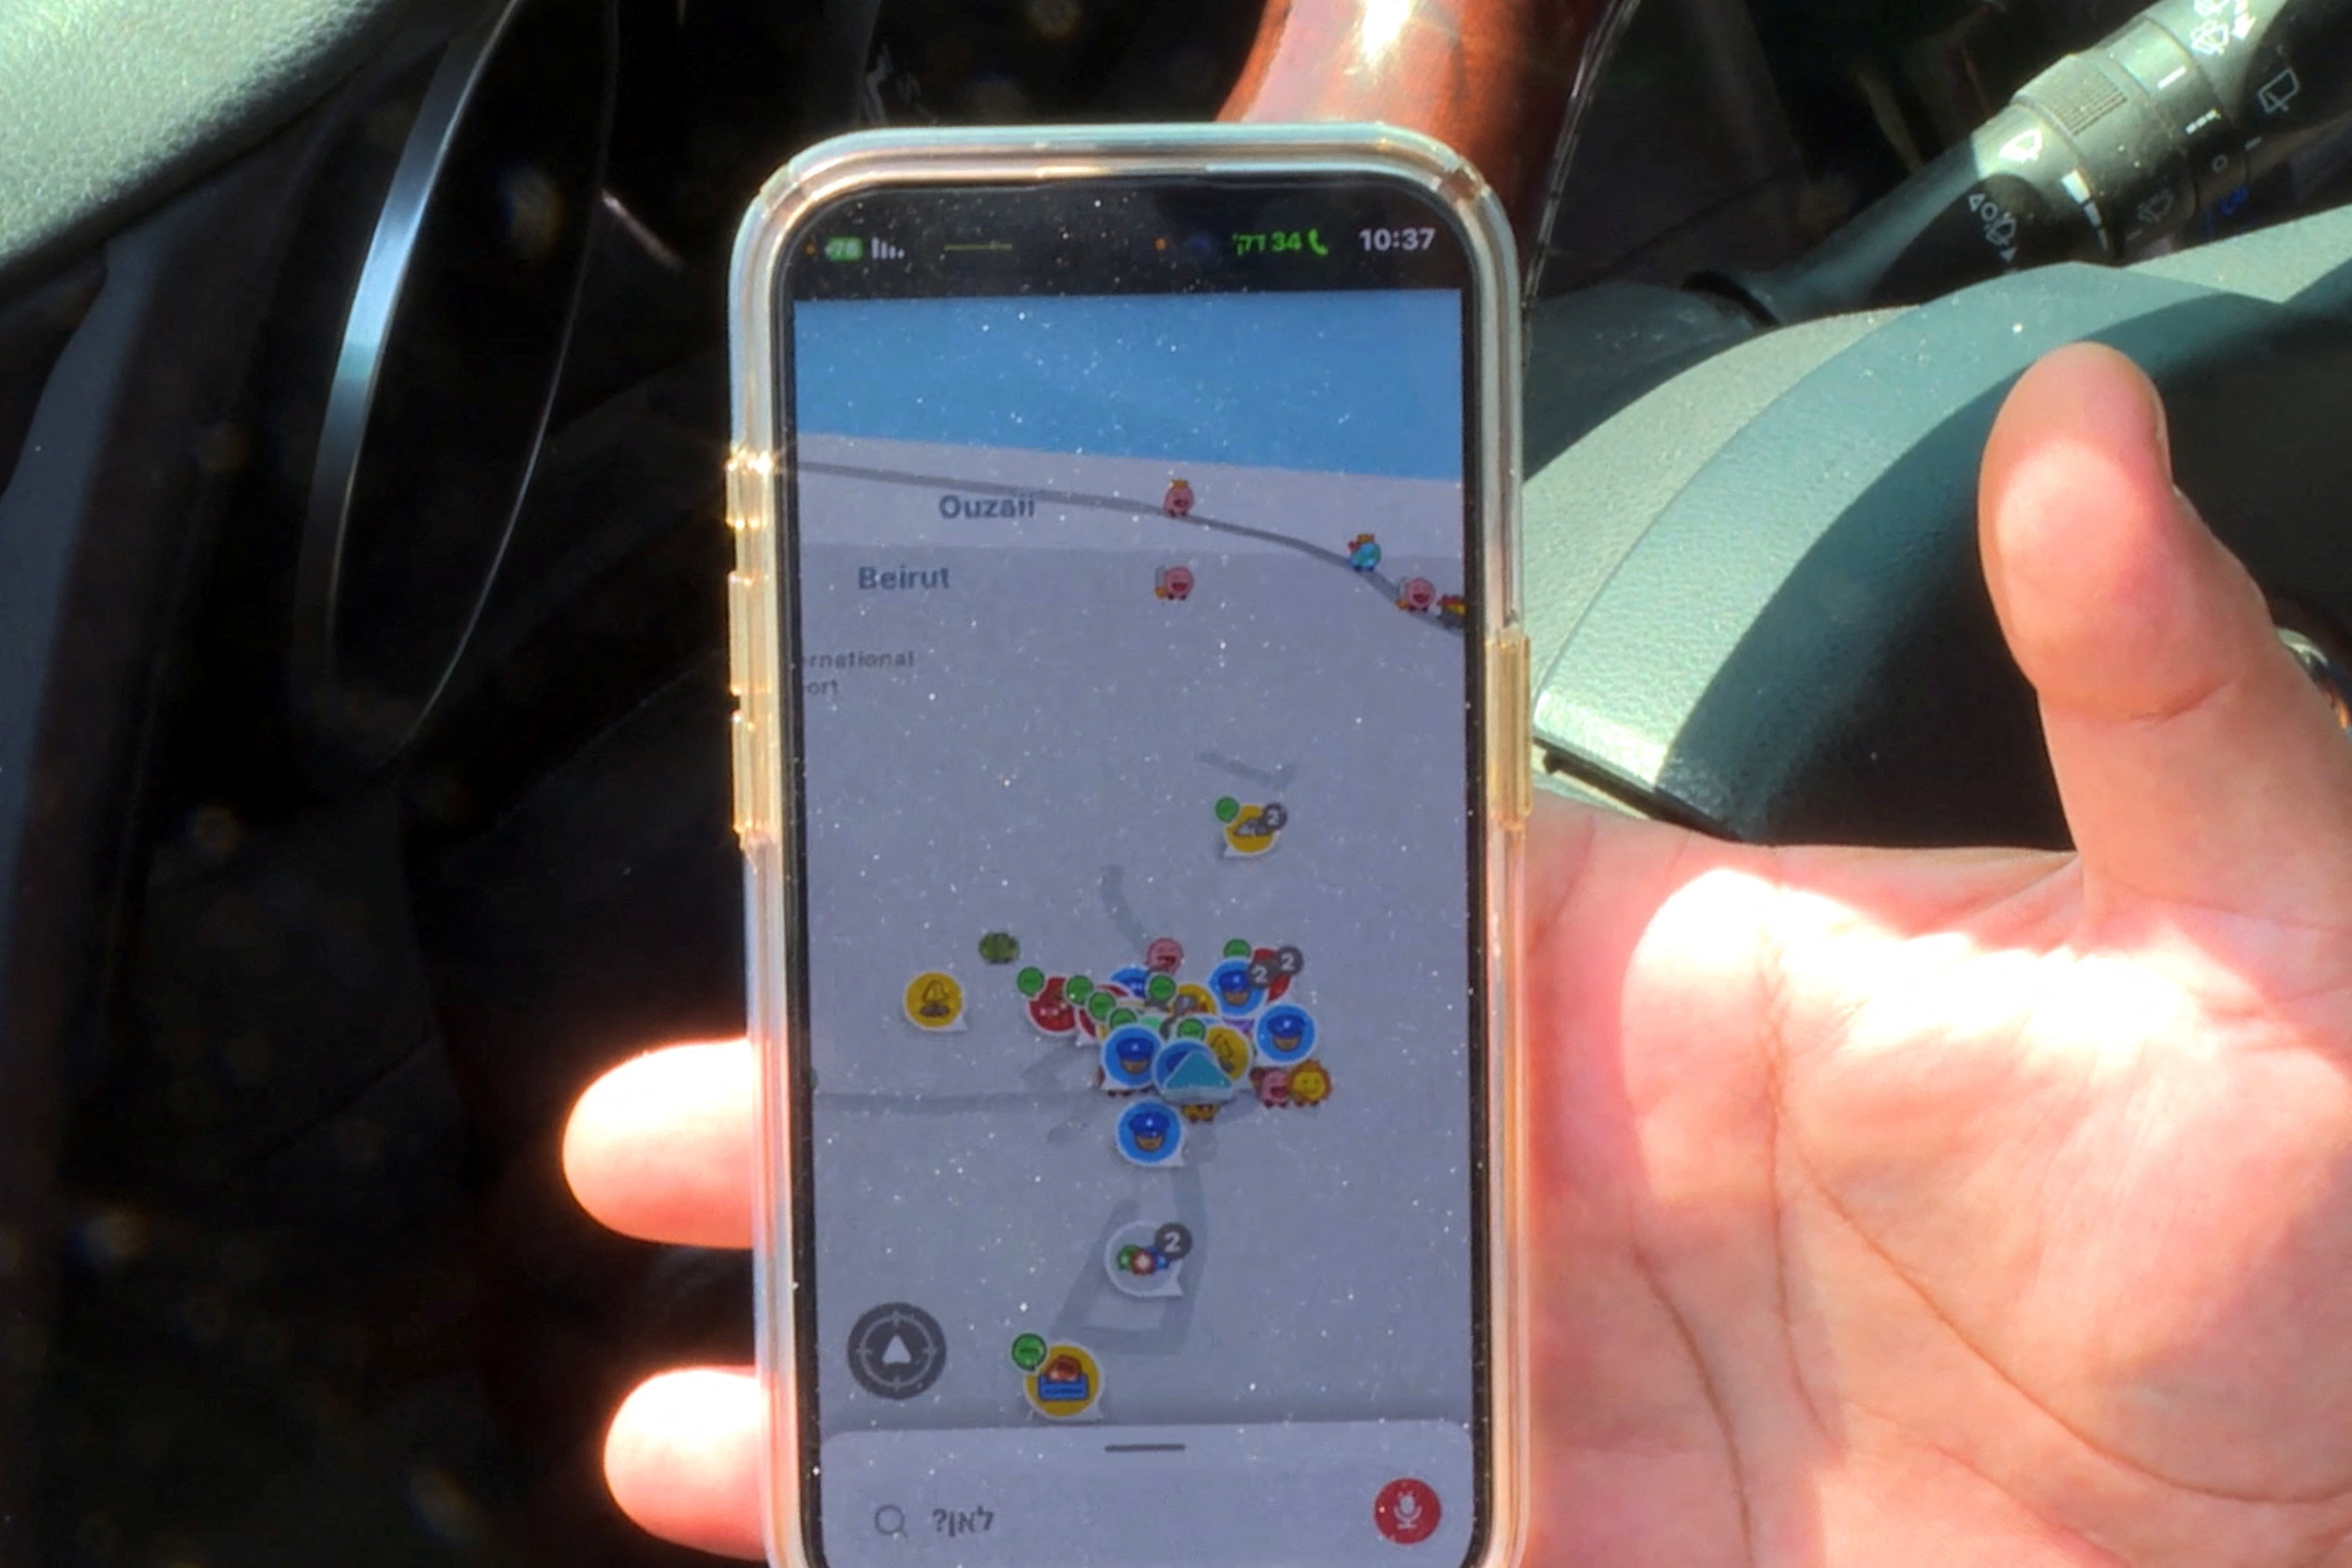 An Israeli driver uses Waze, an Israeli mobile satellite navigation application showing his location as near Beirut in Lebanon, amid concerns of a possible escalation in violence after the killing of Iranian generals in Damascus, in Tel Aviv